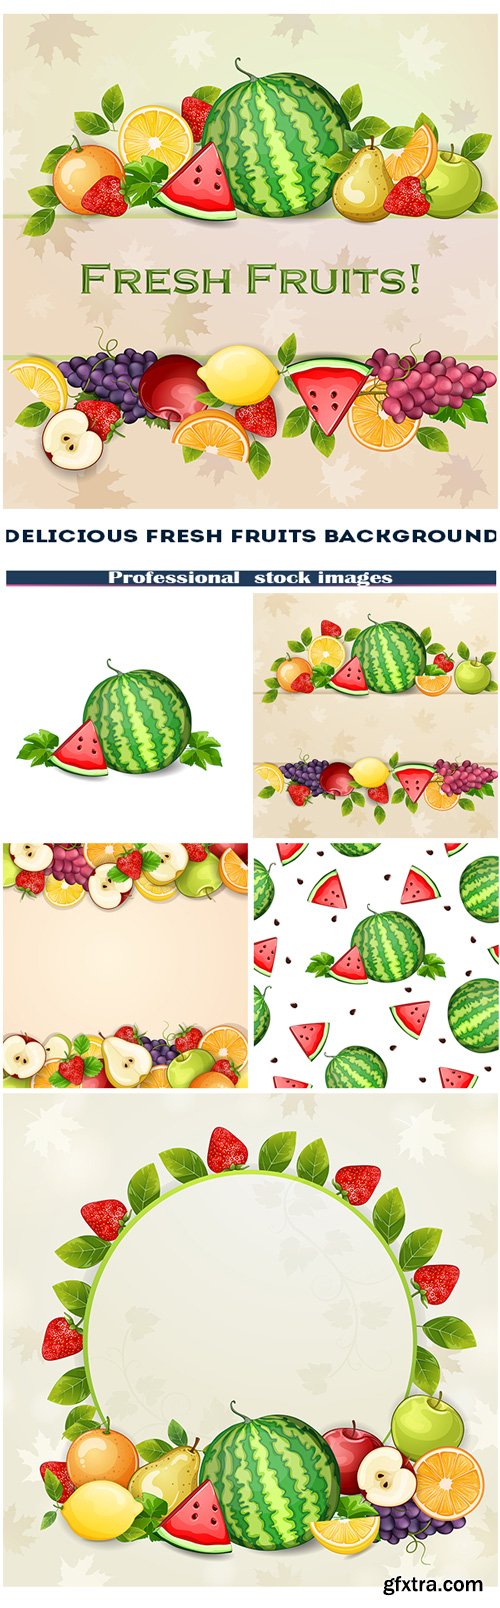 Delicious fresh fruits background